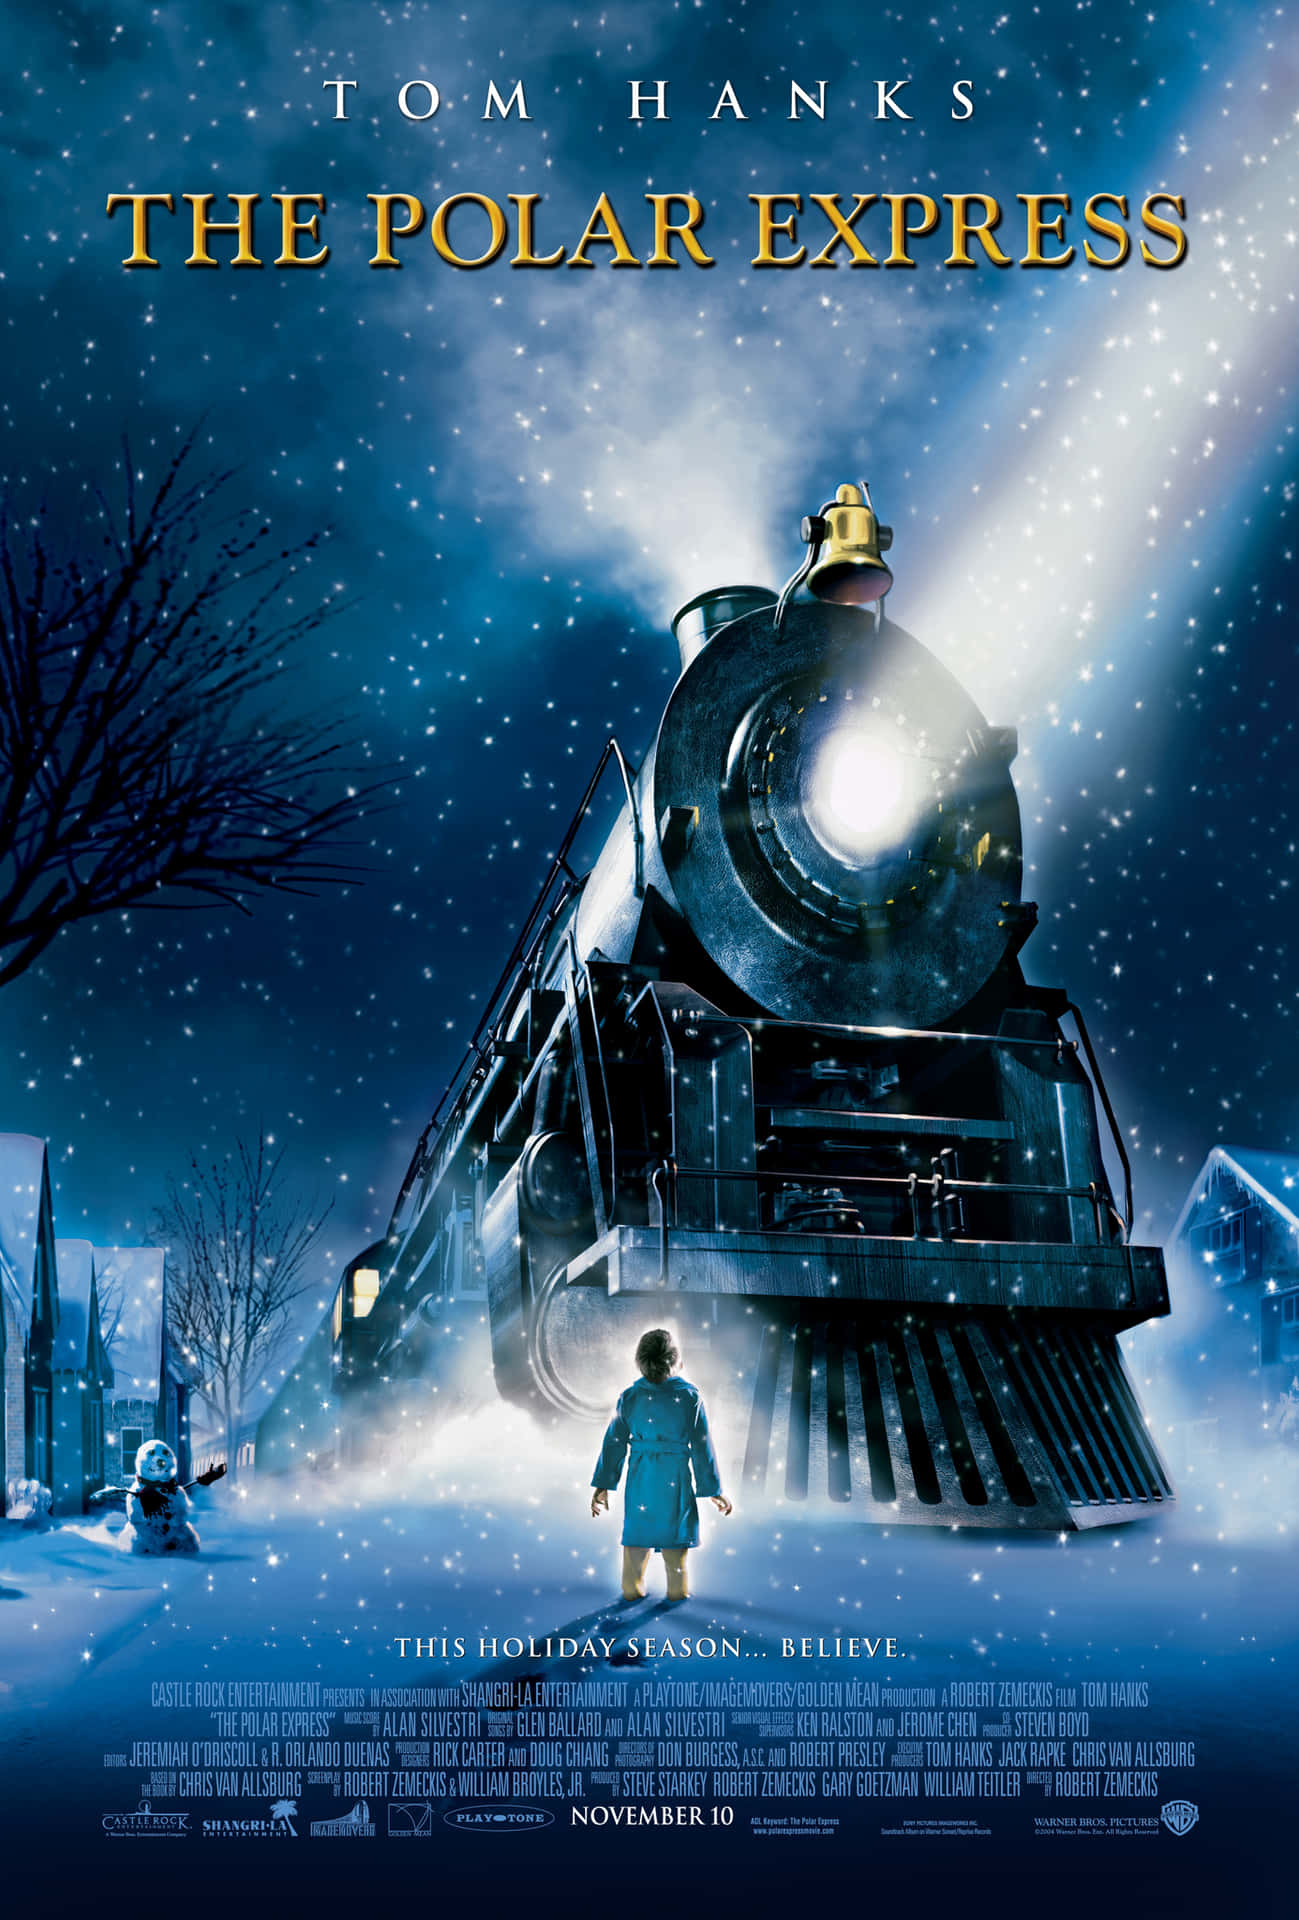 Get ready for the journey of a lifetime aboard the Polar Express!